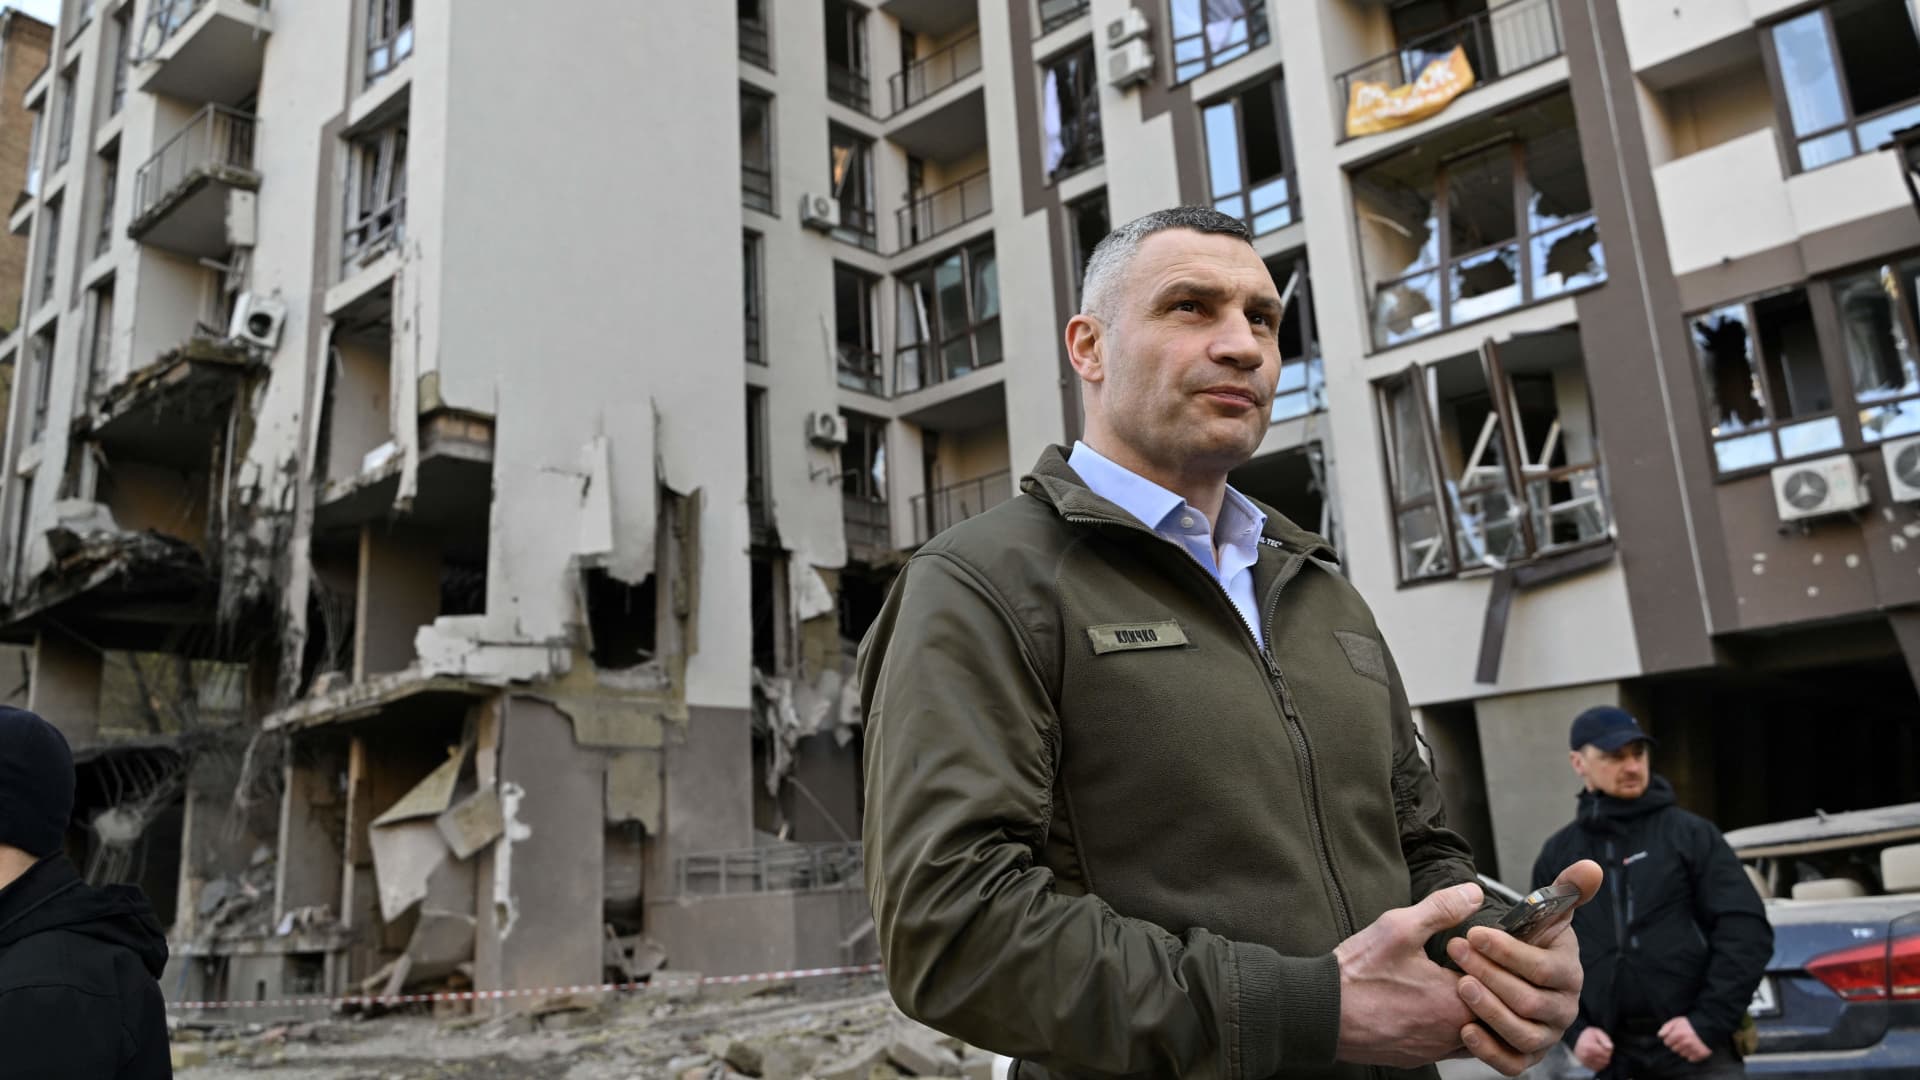 Kyiv's mayor Vitali Klitschko stands in front of a damaged building following Russian strikes in Kyiv on April 29, 2022, amid Russian invasion of Ukraine.